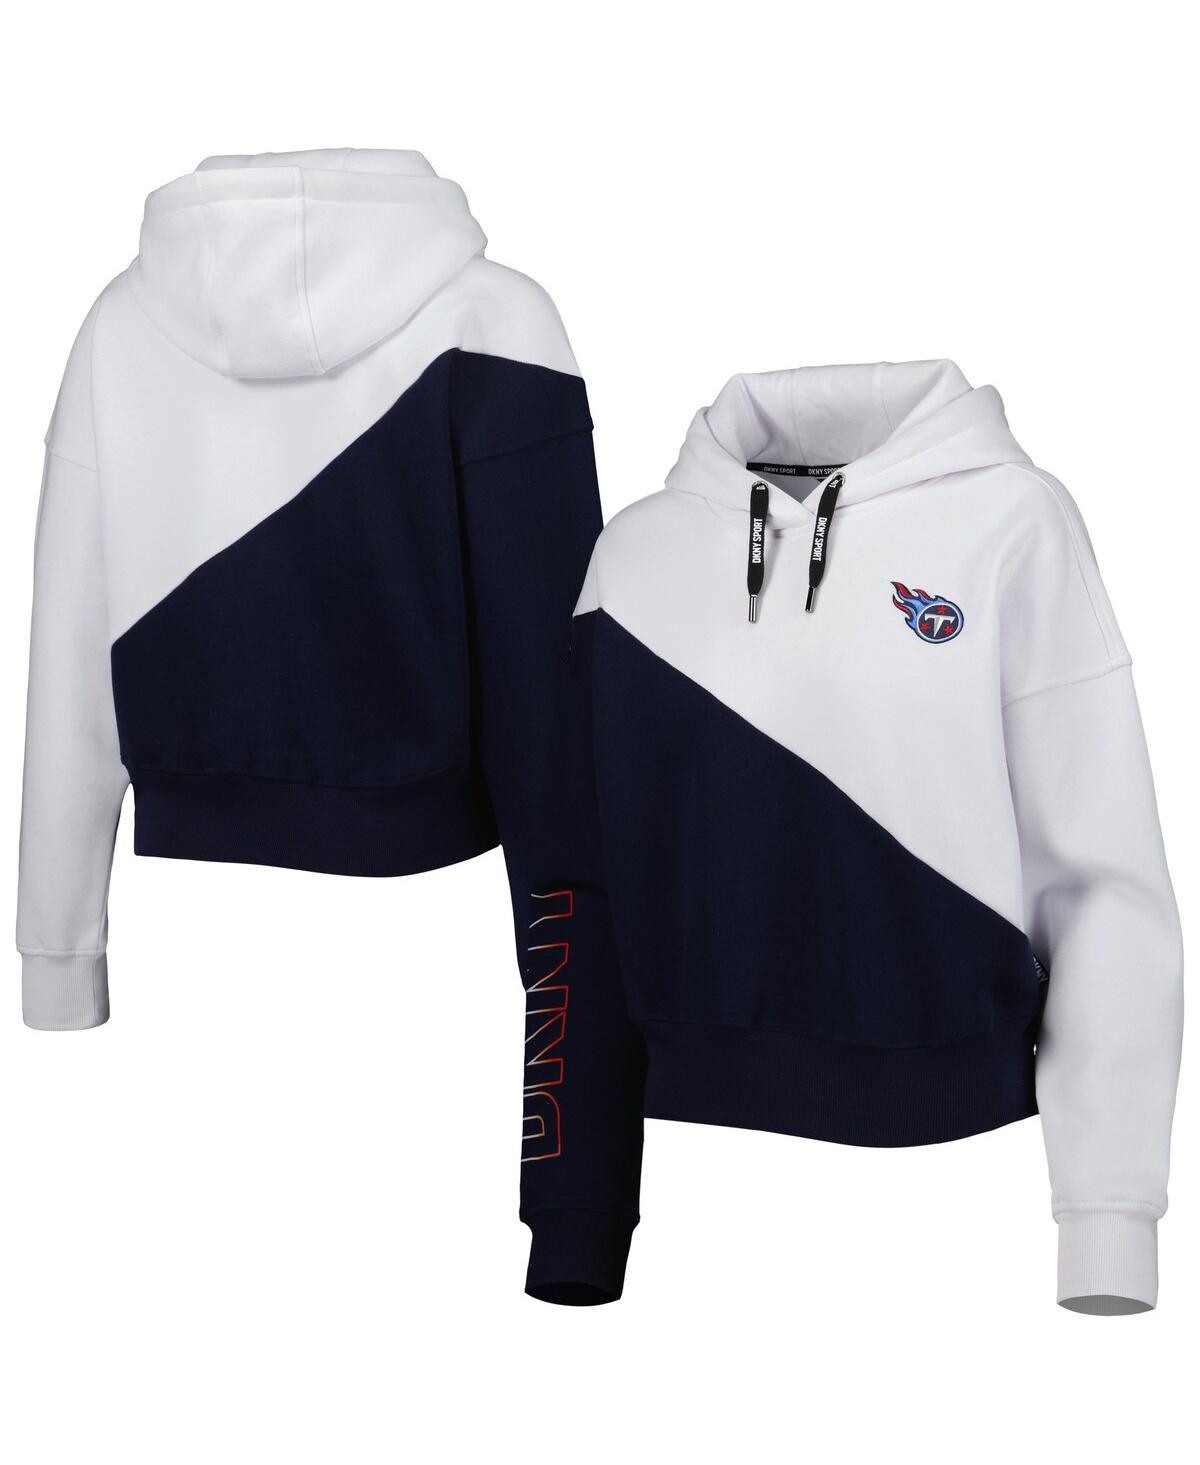 Women's Dkny Sport White, Navy Tennessee Titans Bobbi Color Blocked Pullover Hoodie - White, Navy